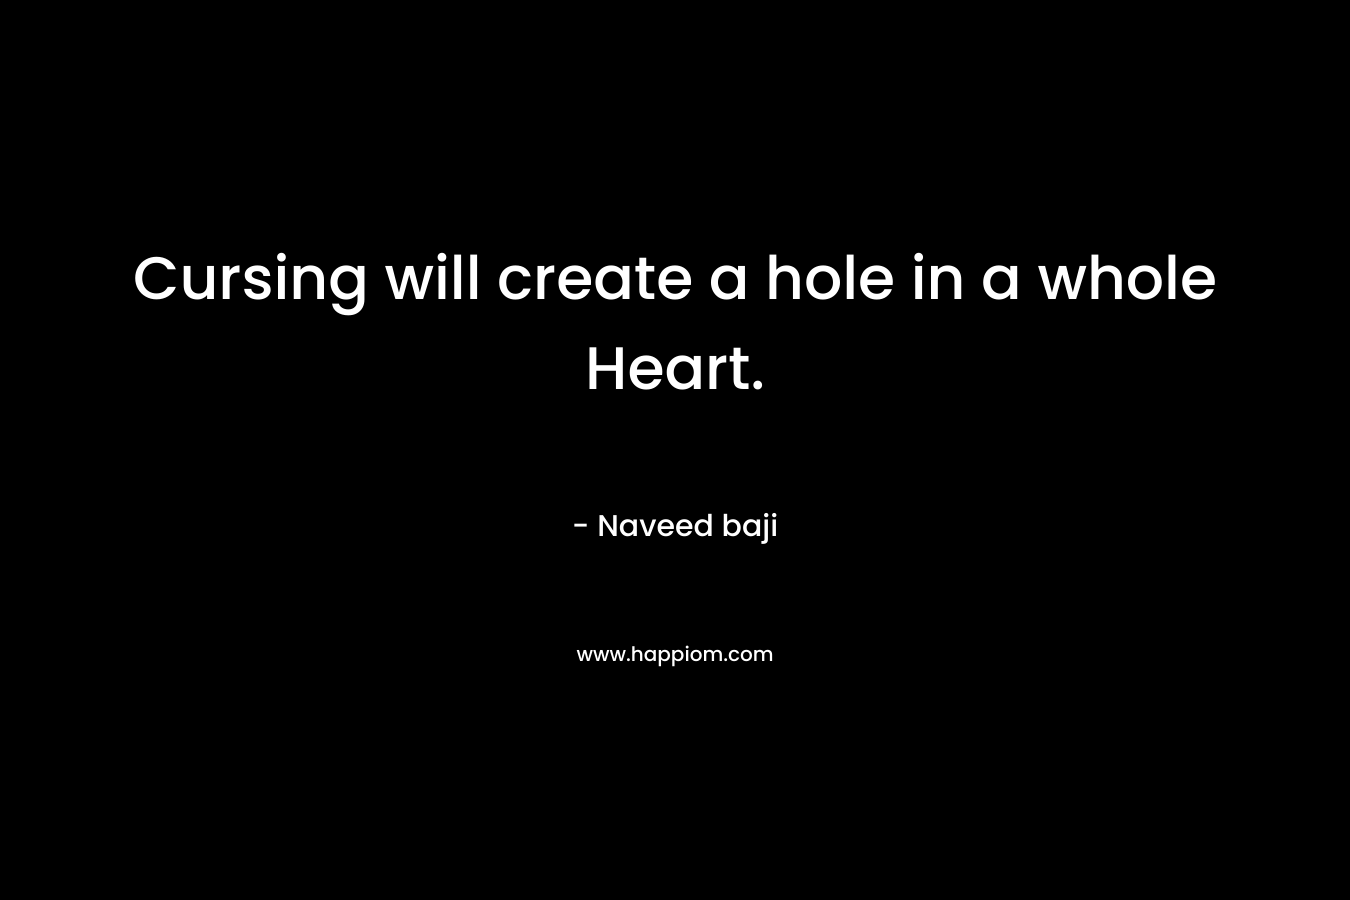 Cursing will create a hole in a whole Heart.